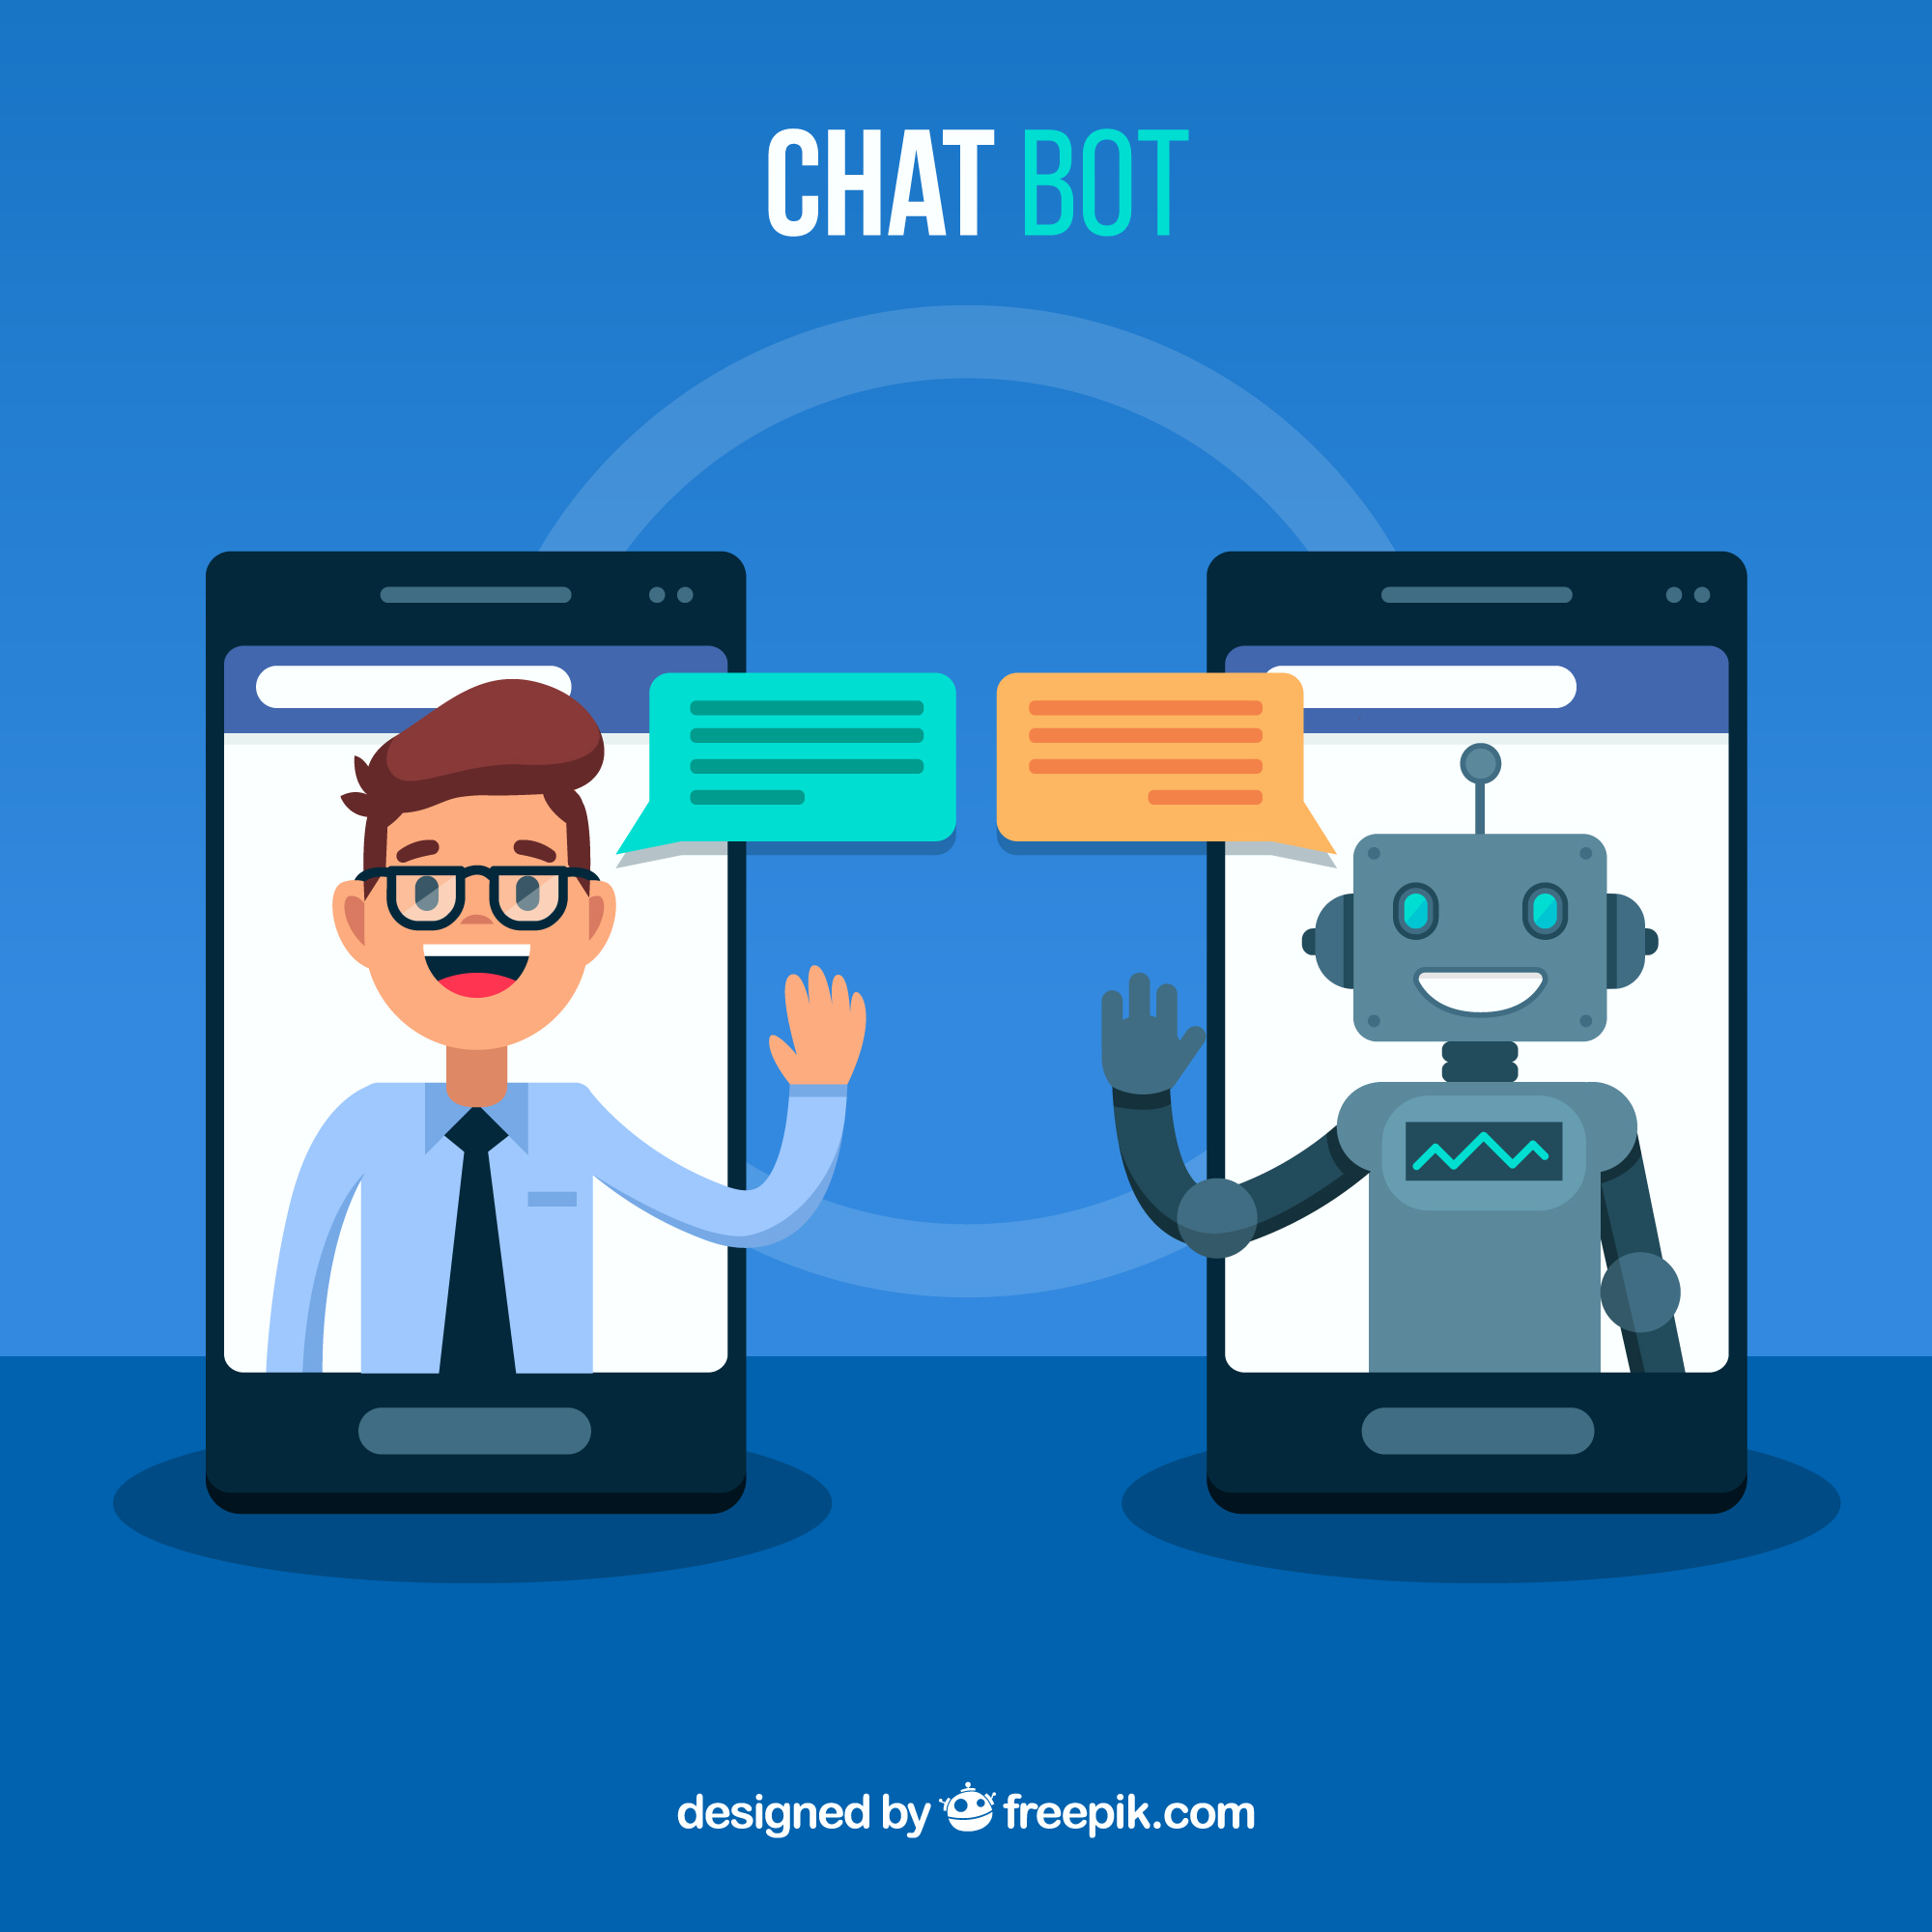 ChatGPT and DiALOGiFY